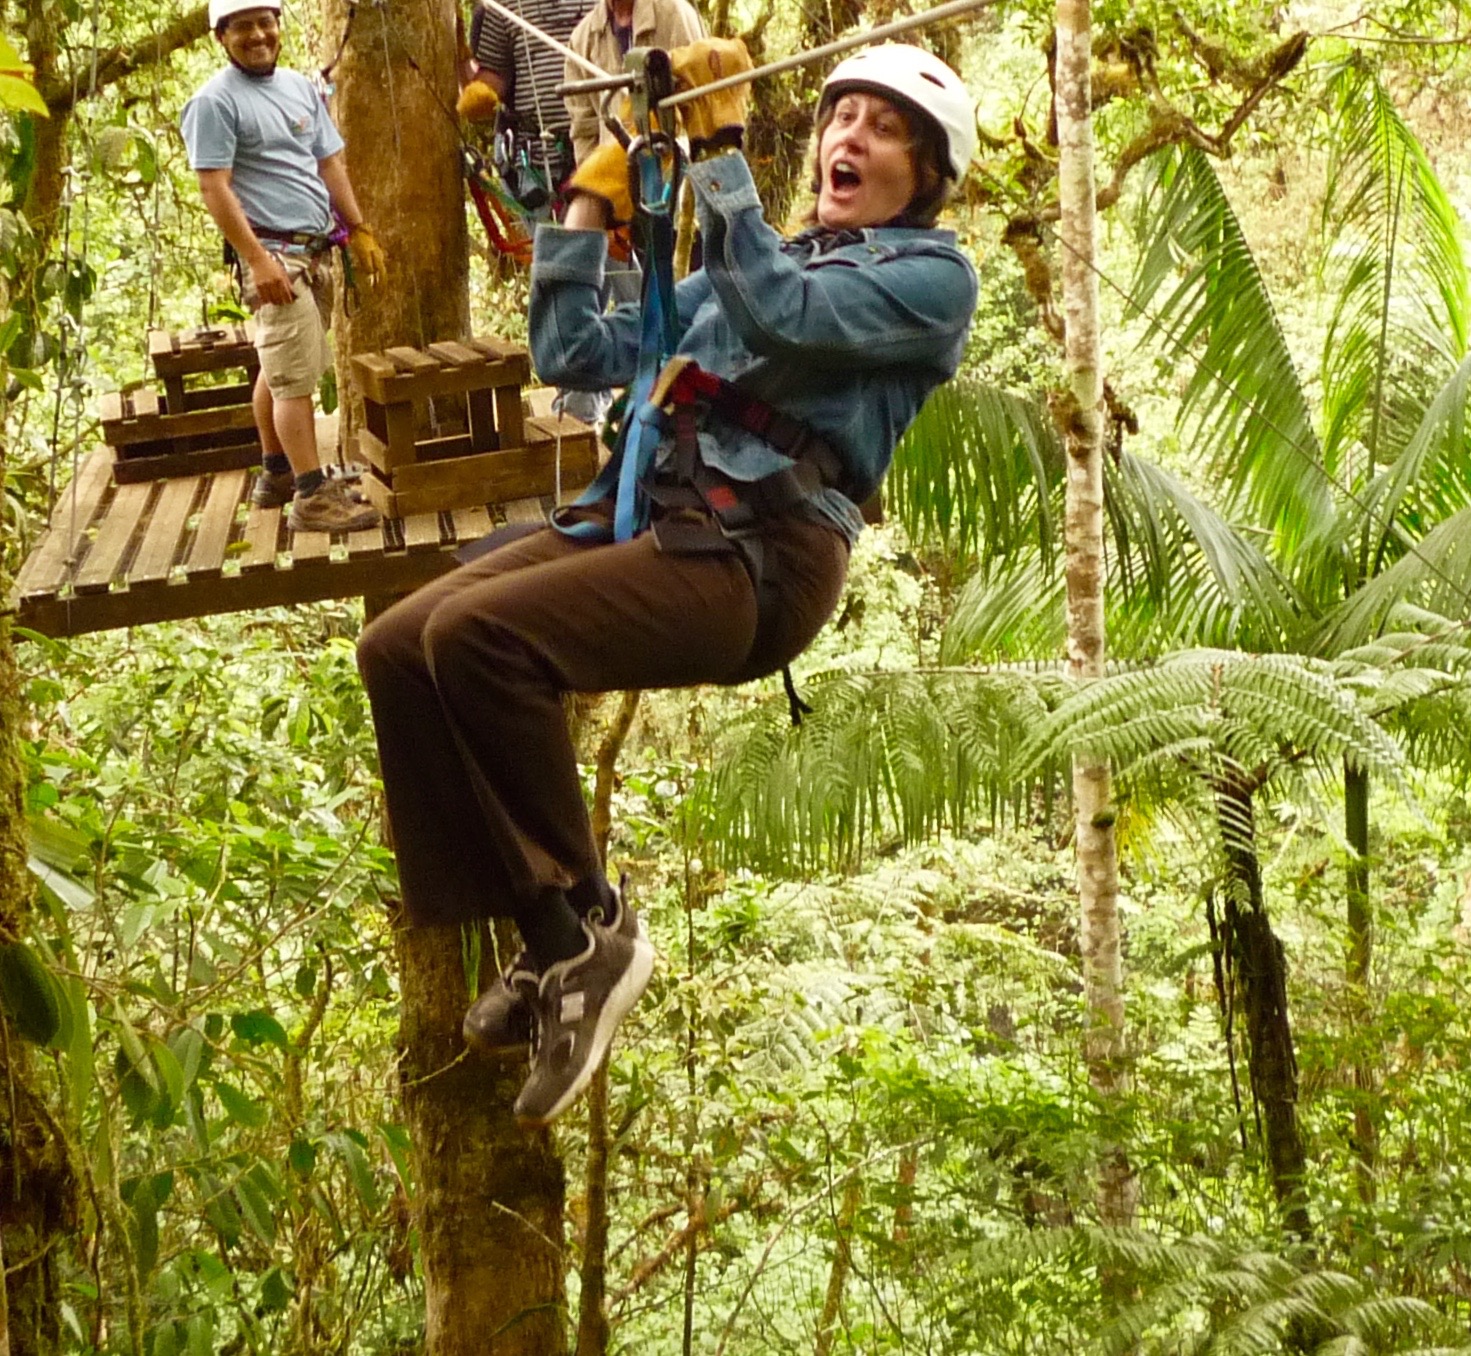 TCO Publisher, Marla Norman experiencing the thrill of the zip lined.